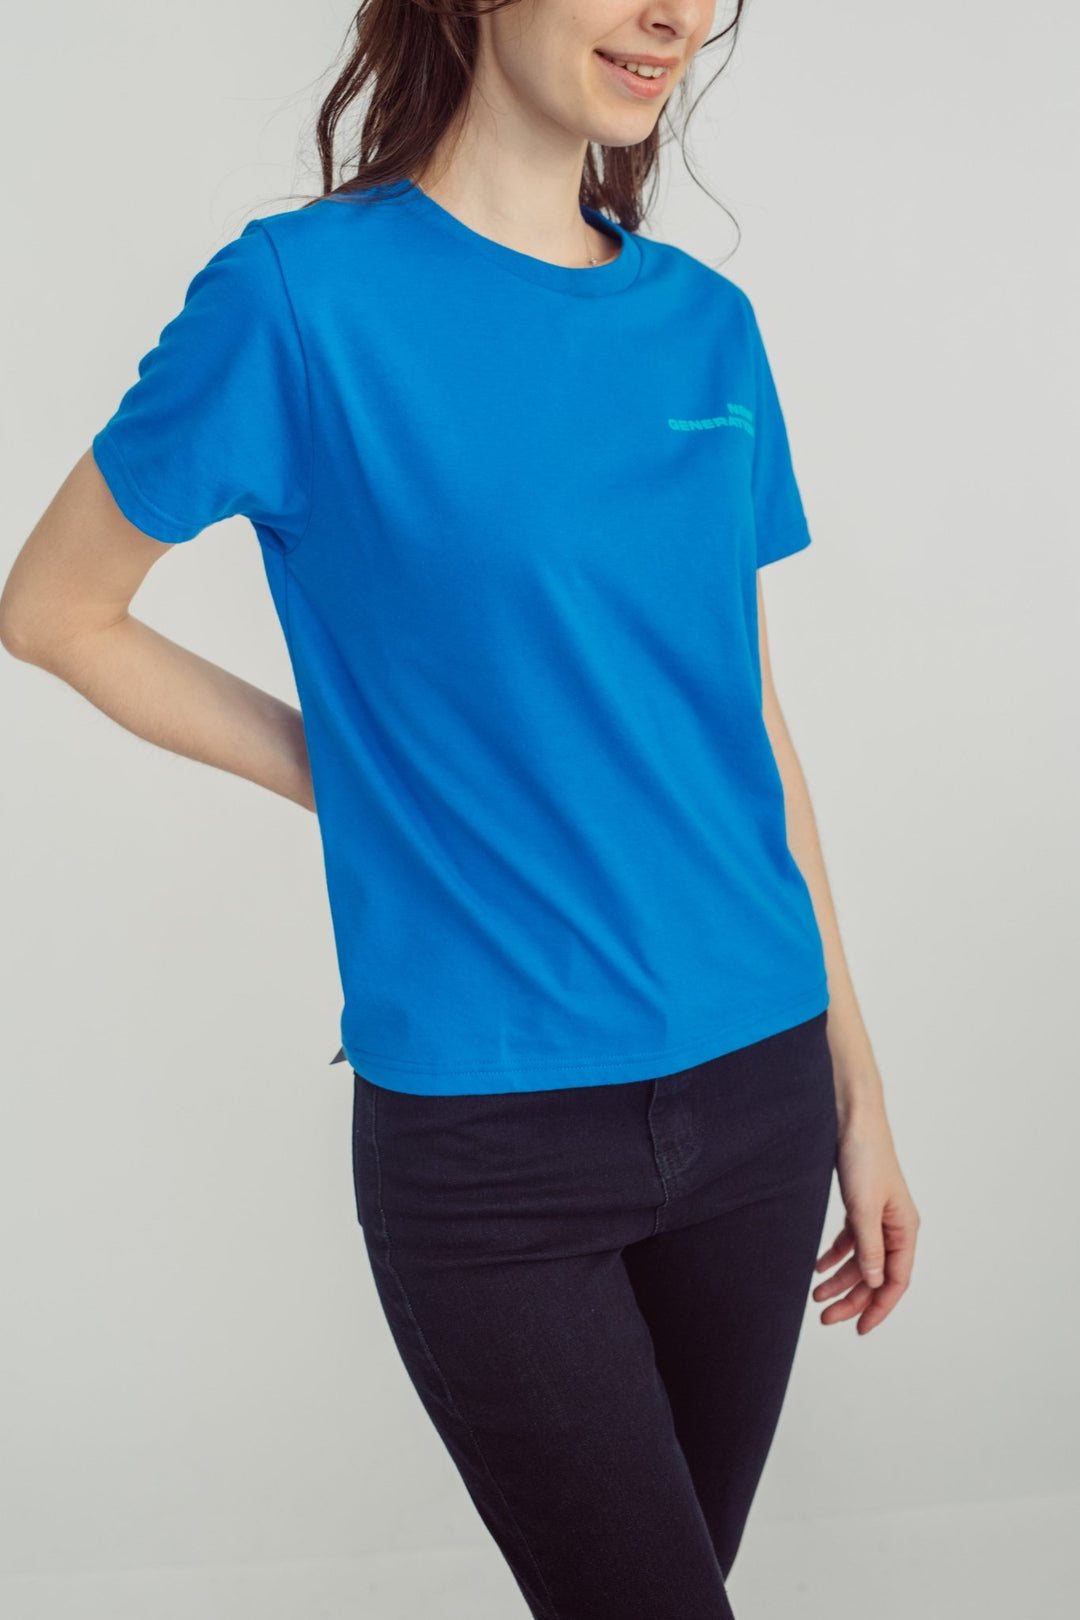 Daphne Statement Classic Fit Tee - Mossimo PH